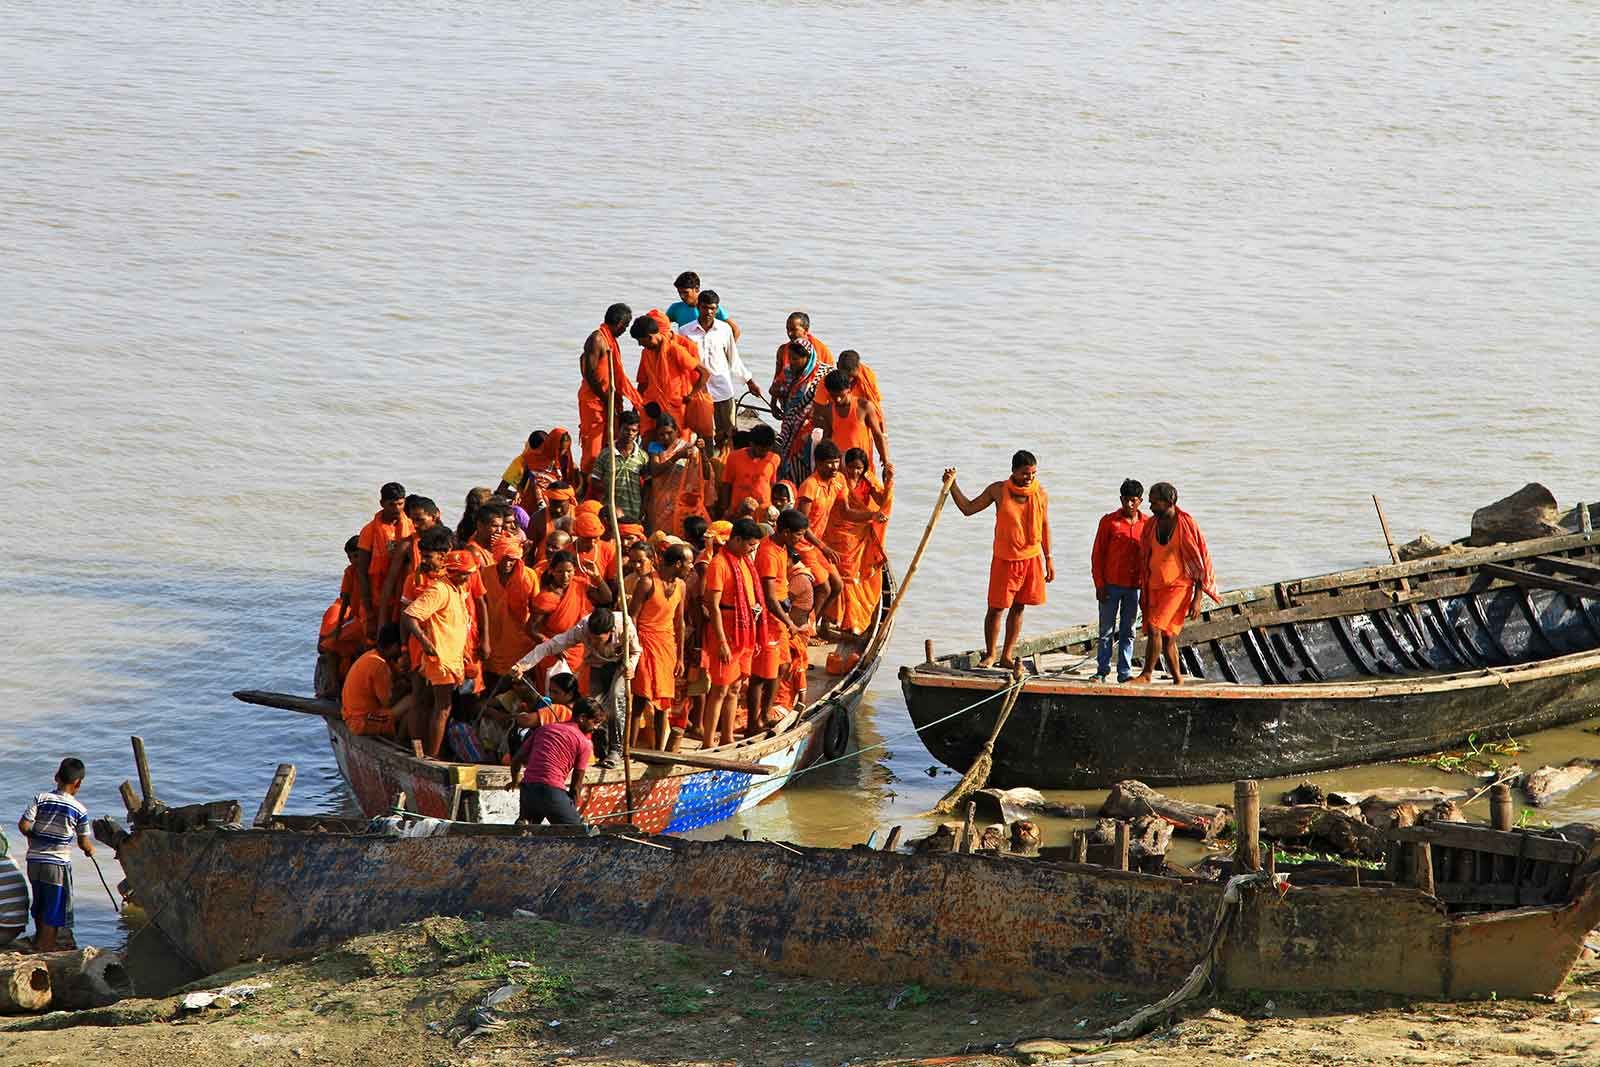 In Hinduism, the river Ganges is considered sacred and is personified as a goddess known as Ganga. It is worshipped by Hindus who believe that bathing in the river causes the remission of sins and facilitates Moksha (liberation from the cycle of life and death). Pilgrims travel long distances to immerse the ashes of their kin in the precious water of the Ganges, bringing their spirits closer to moksha.